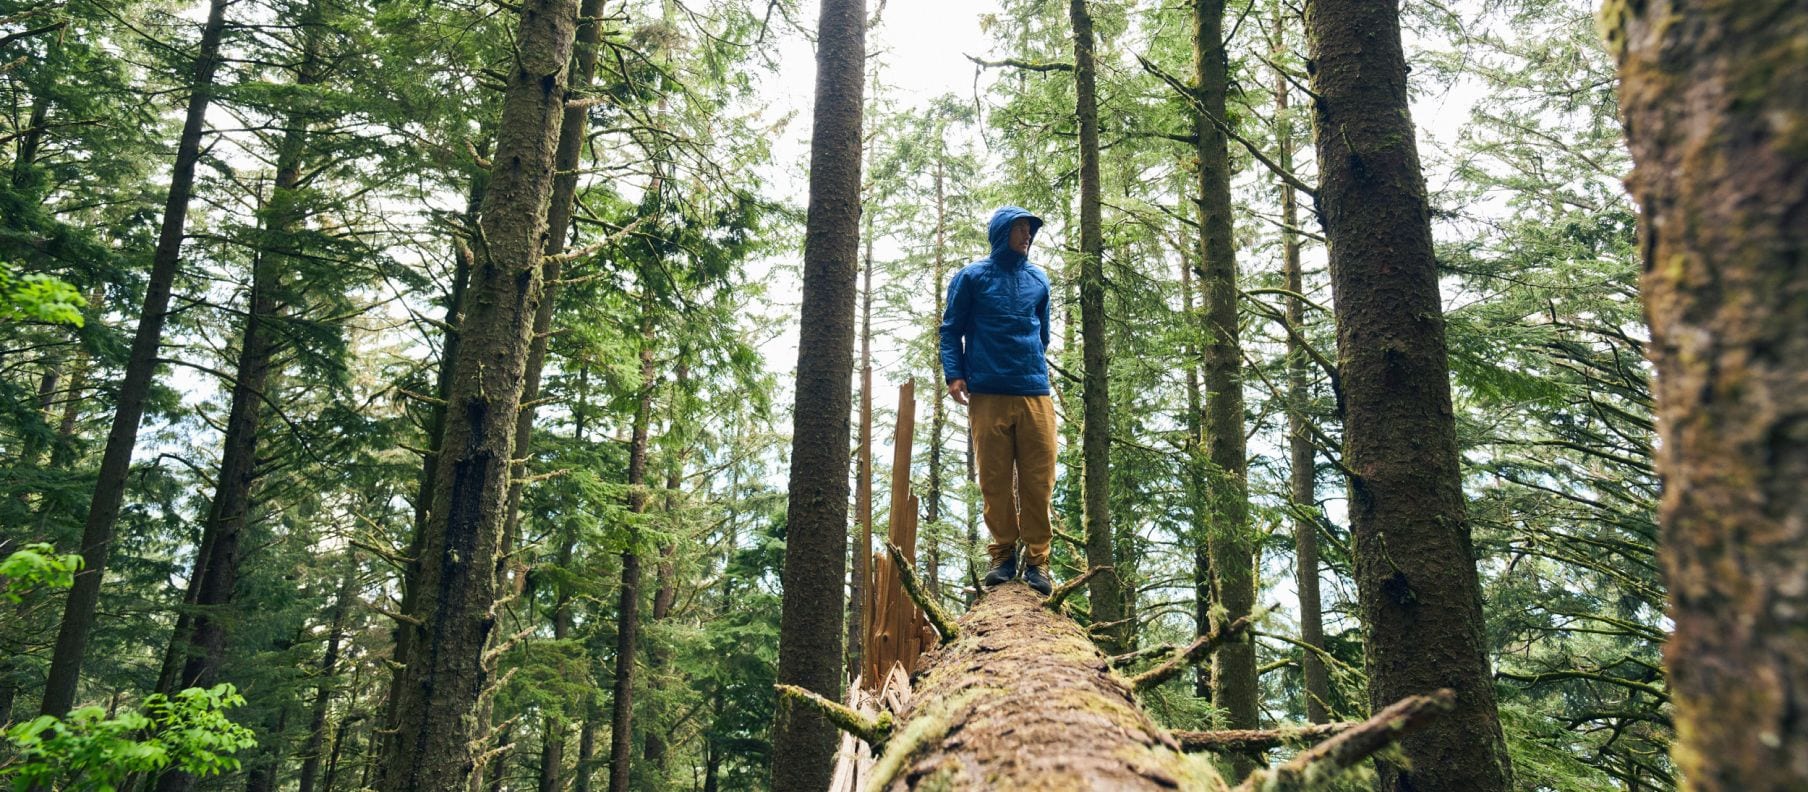 A person is balancing on a fallen tree in the woods wearing rain gear from The North Face.